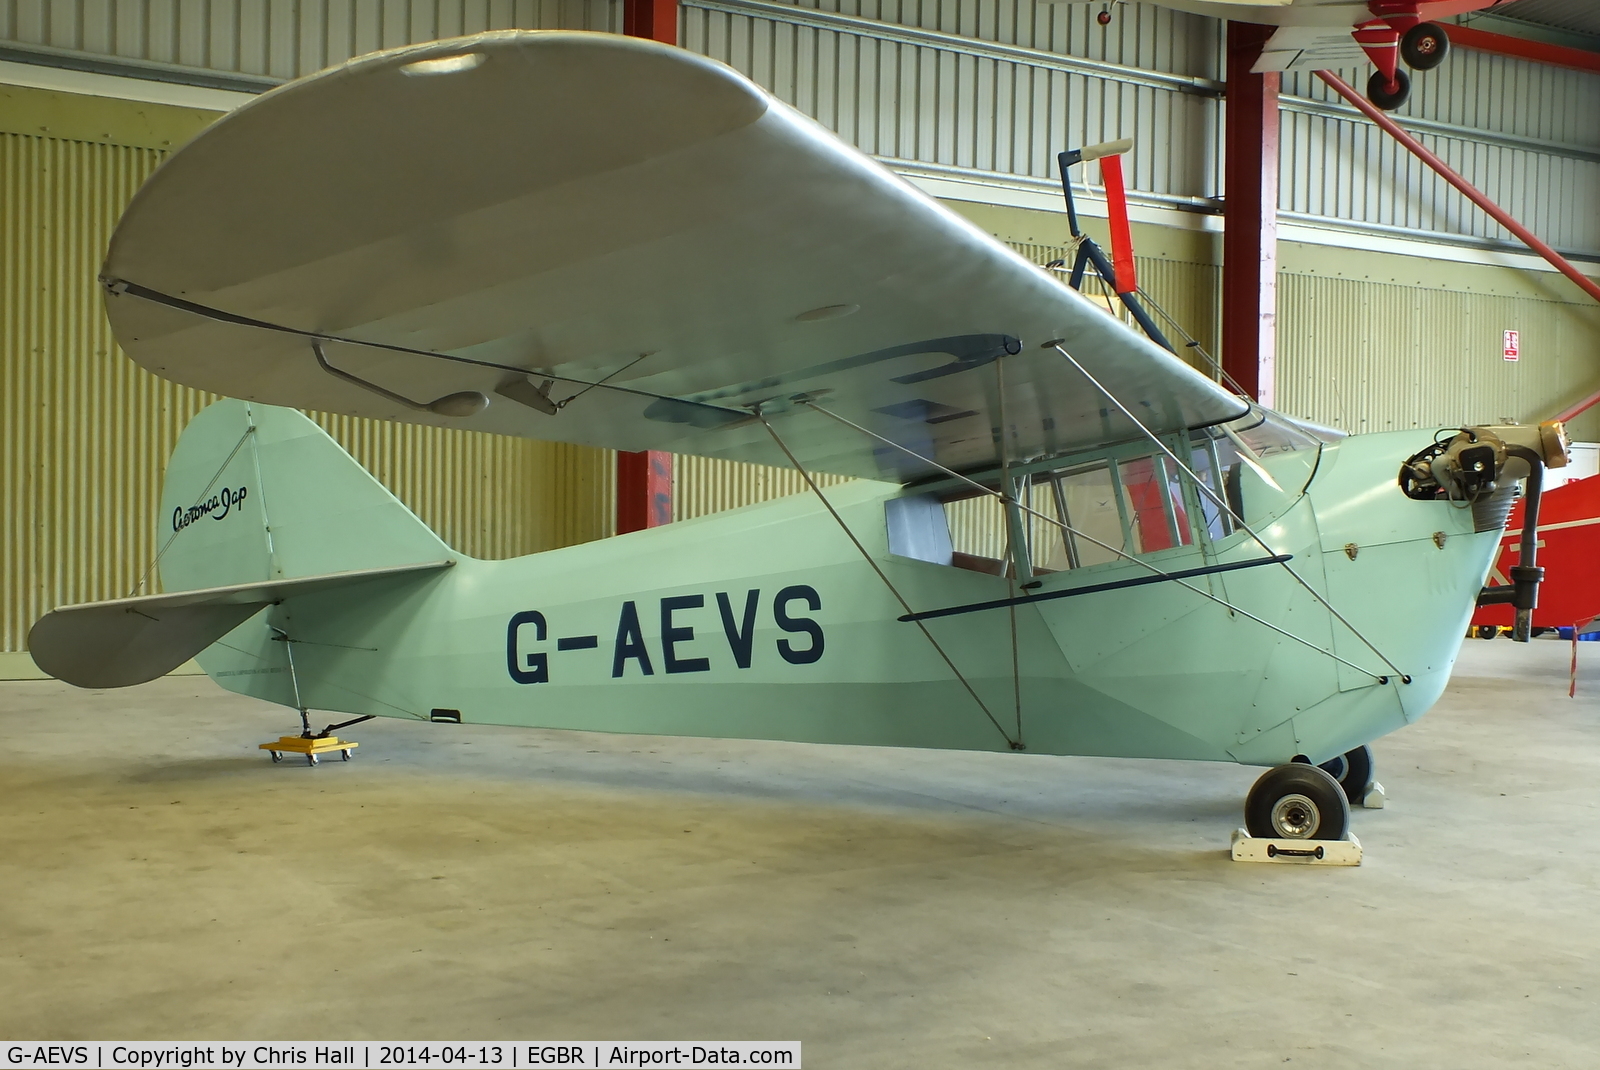 G-AEVS, 1937 Aeronca 100 C/N AB114, at Breighton's 'Early Bird' Fly-in 13/04/14